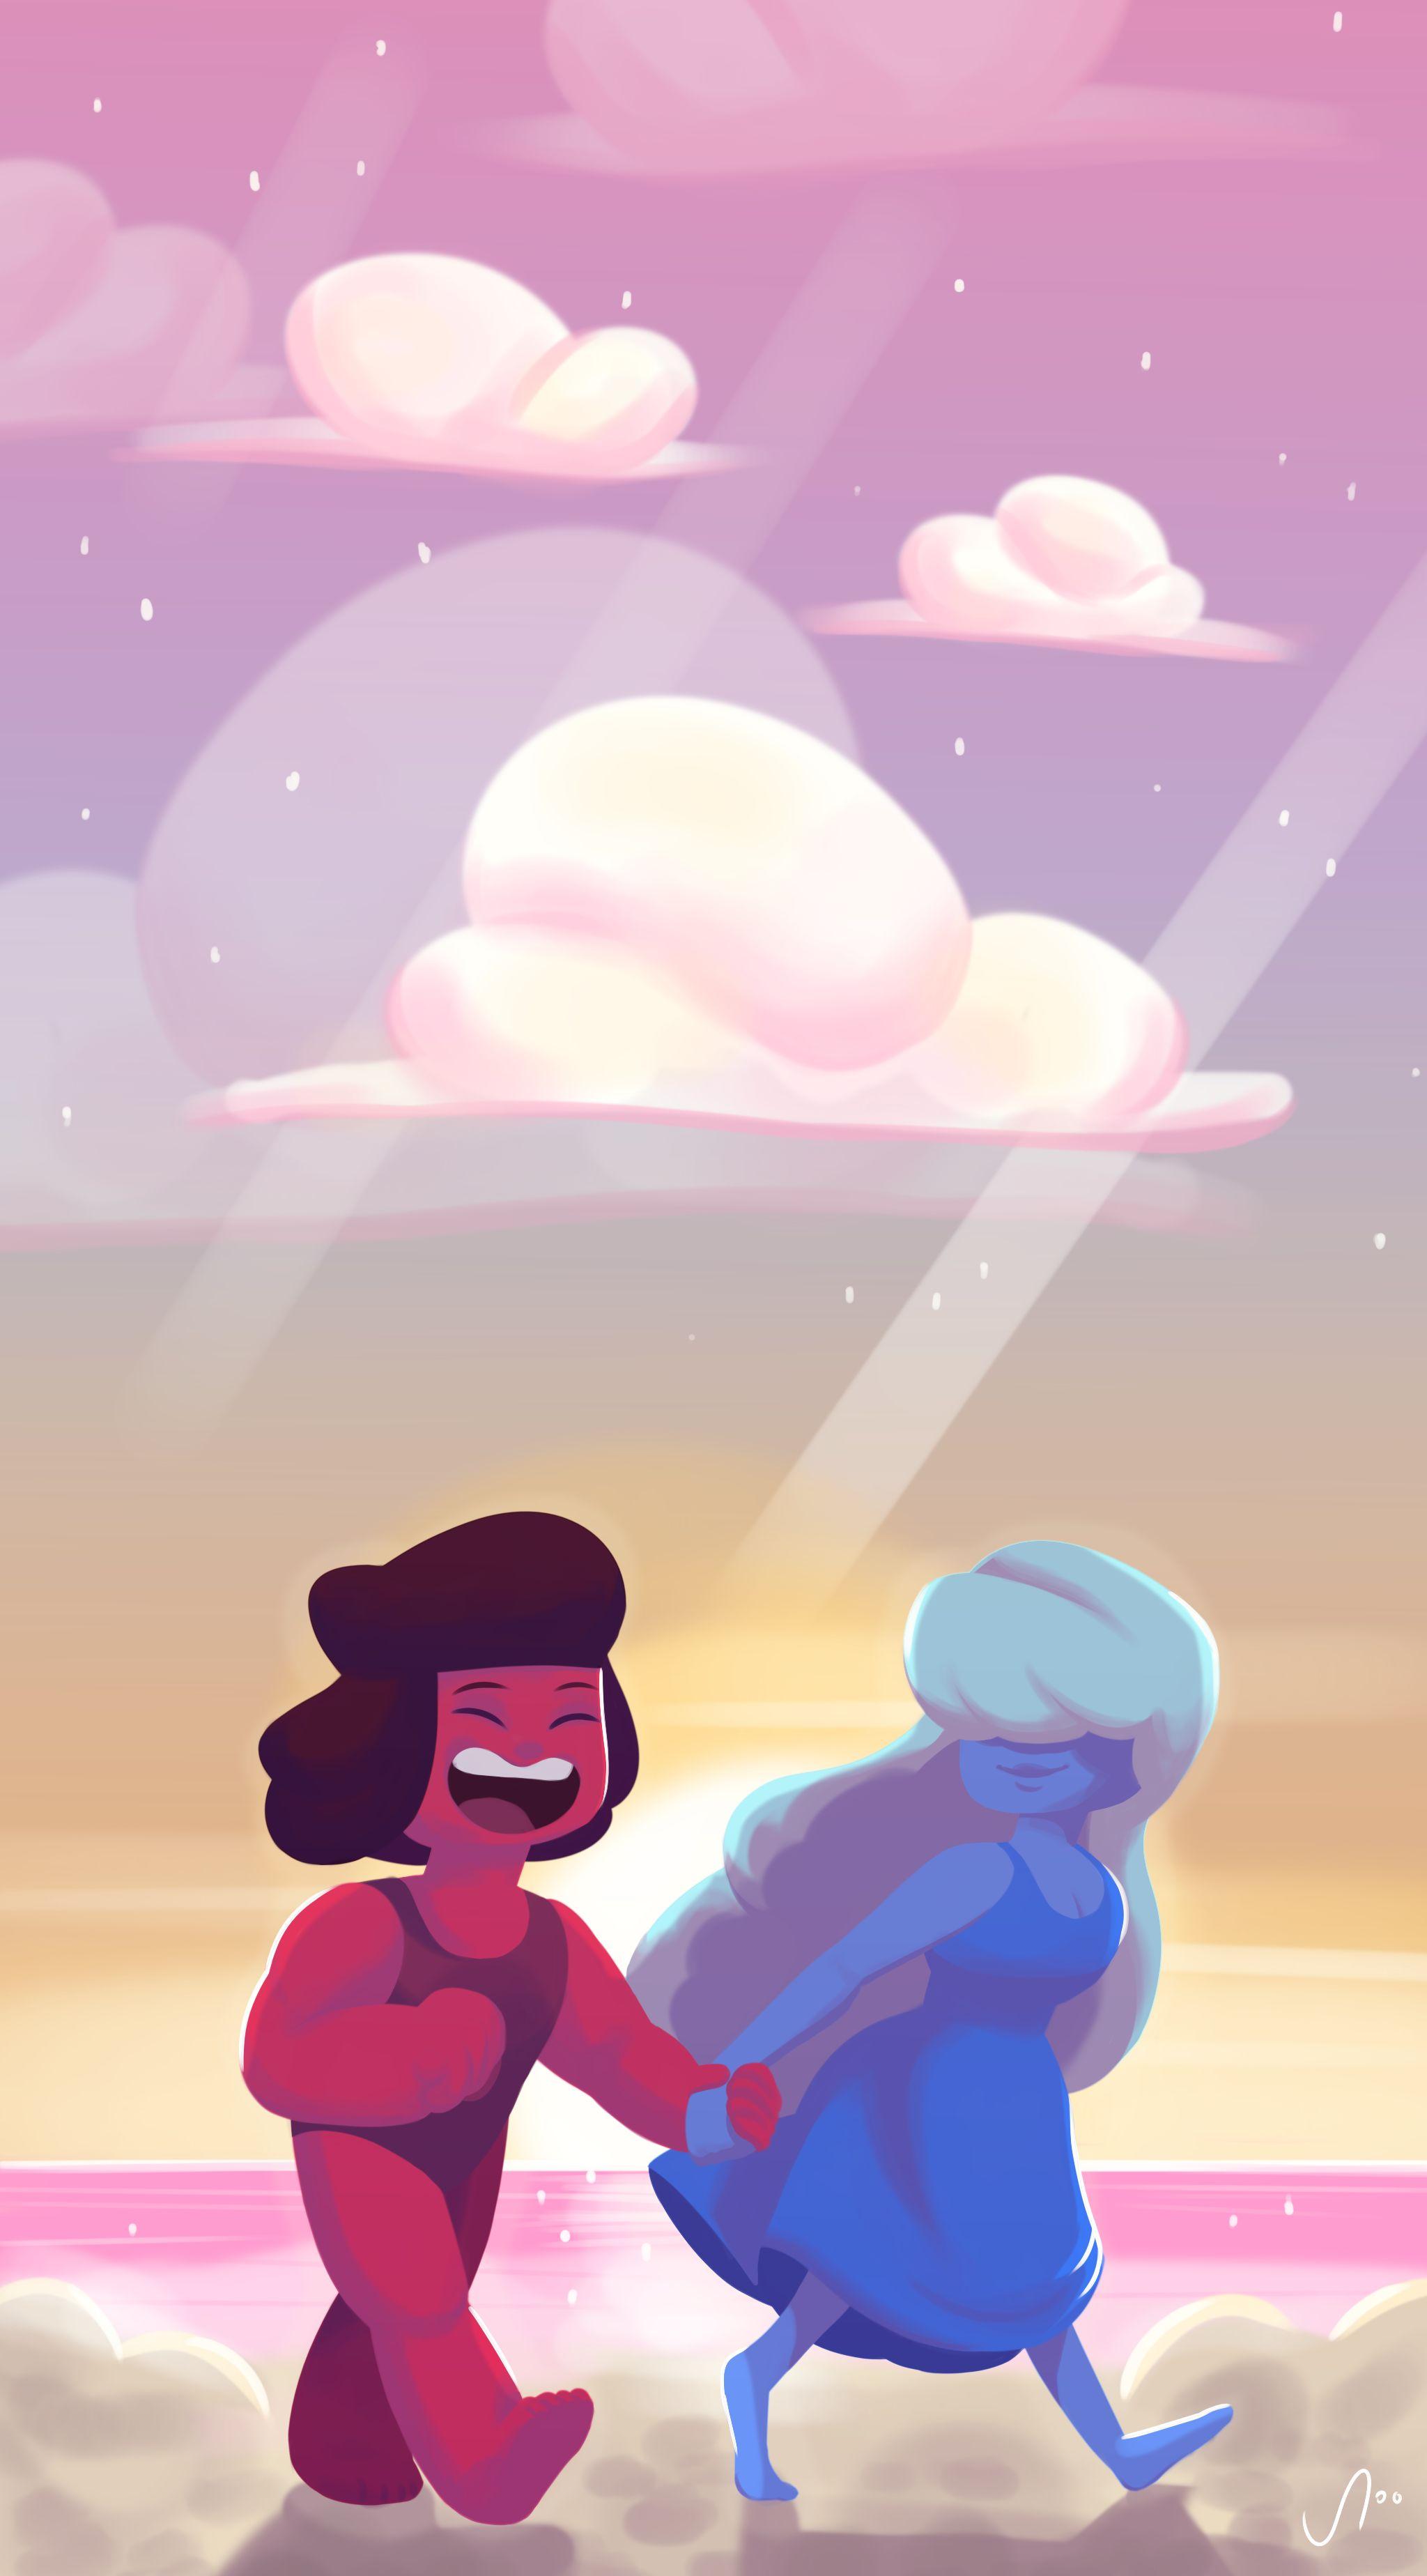 Ruby and Sapphire on the beach! (Phone wallpaper by me :DD)